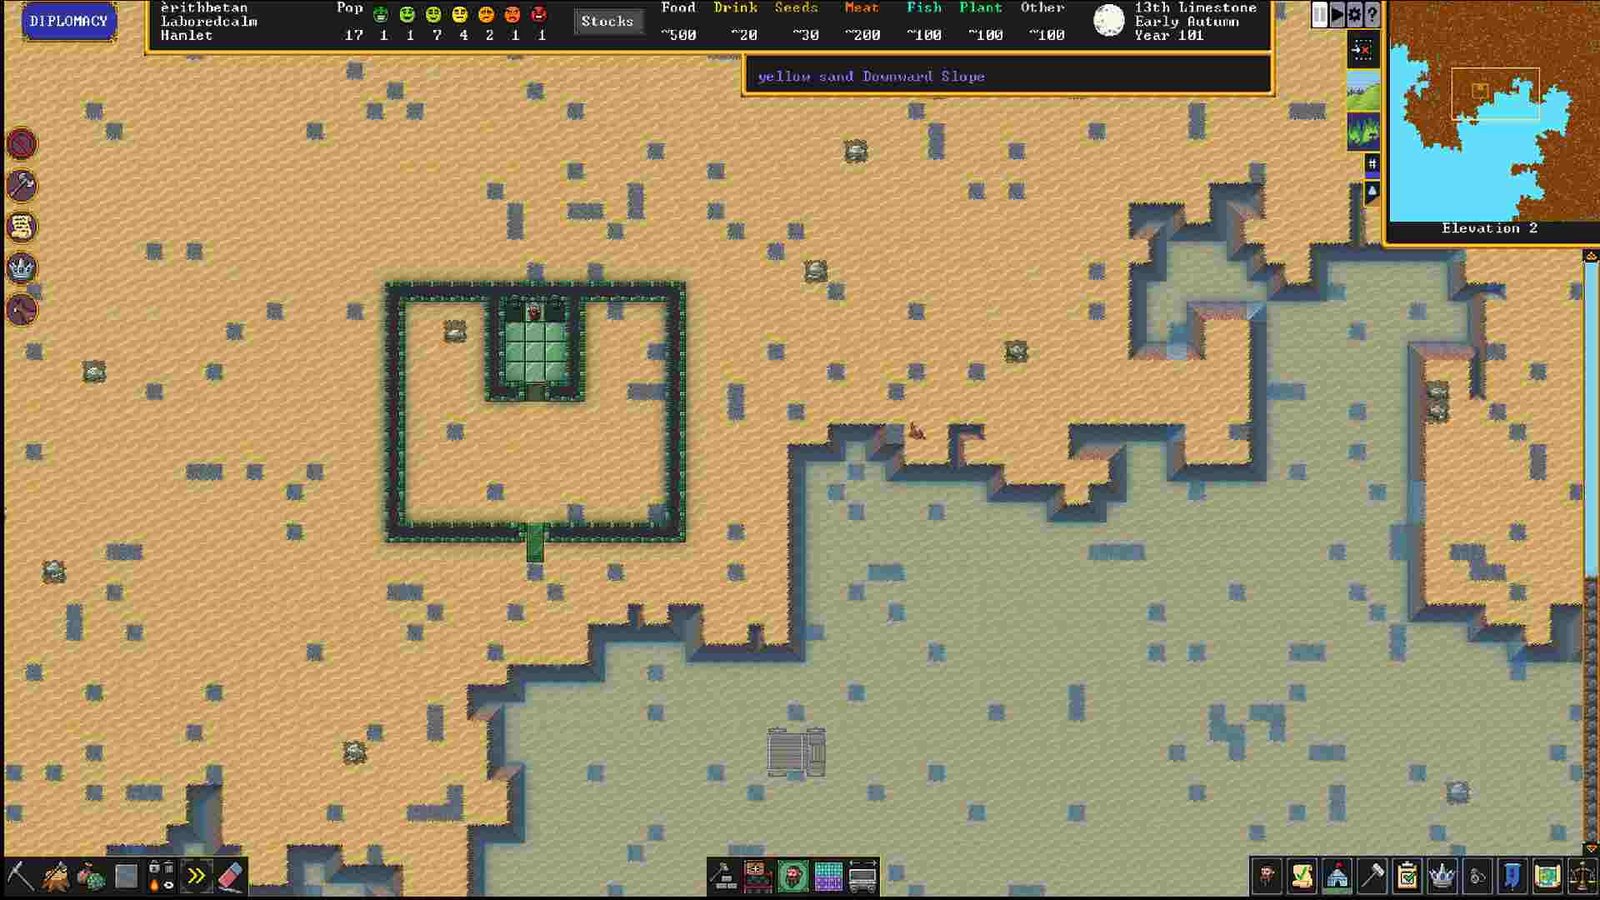 Dwarf Fortress Linux Release Date: When is it coming out?